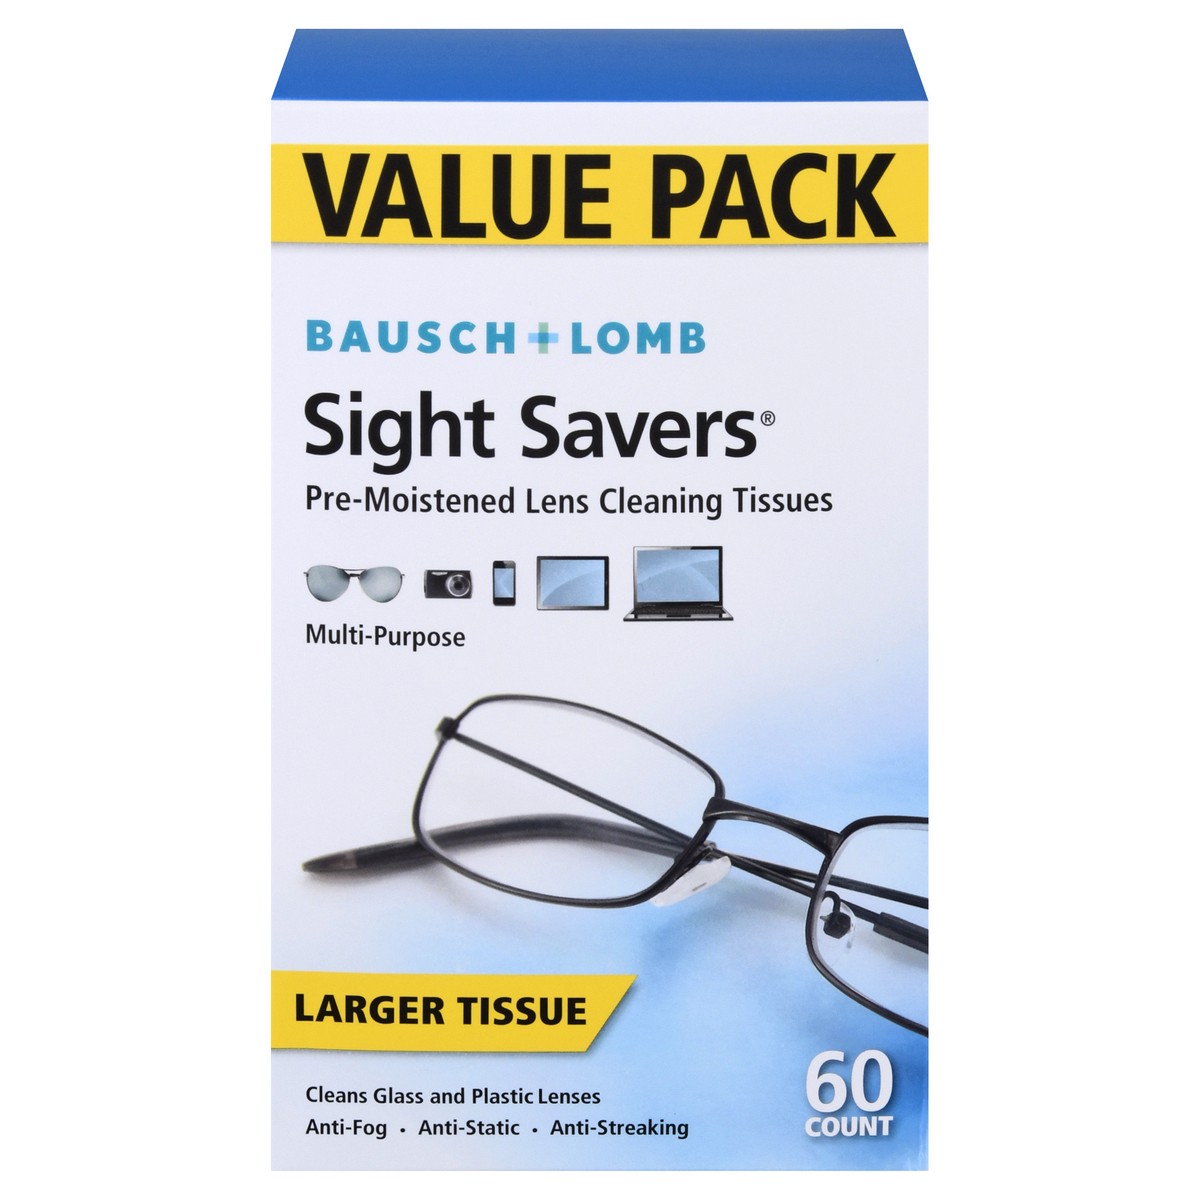 slide 1 of 9, Bausch + Lomb Sight Savers Value Pack Larger Pre-Moistened Lens Cleaning Tissues 60 ea, 60 ct